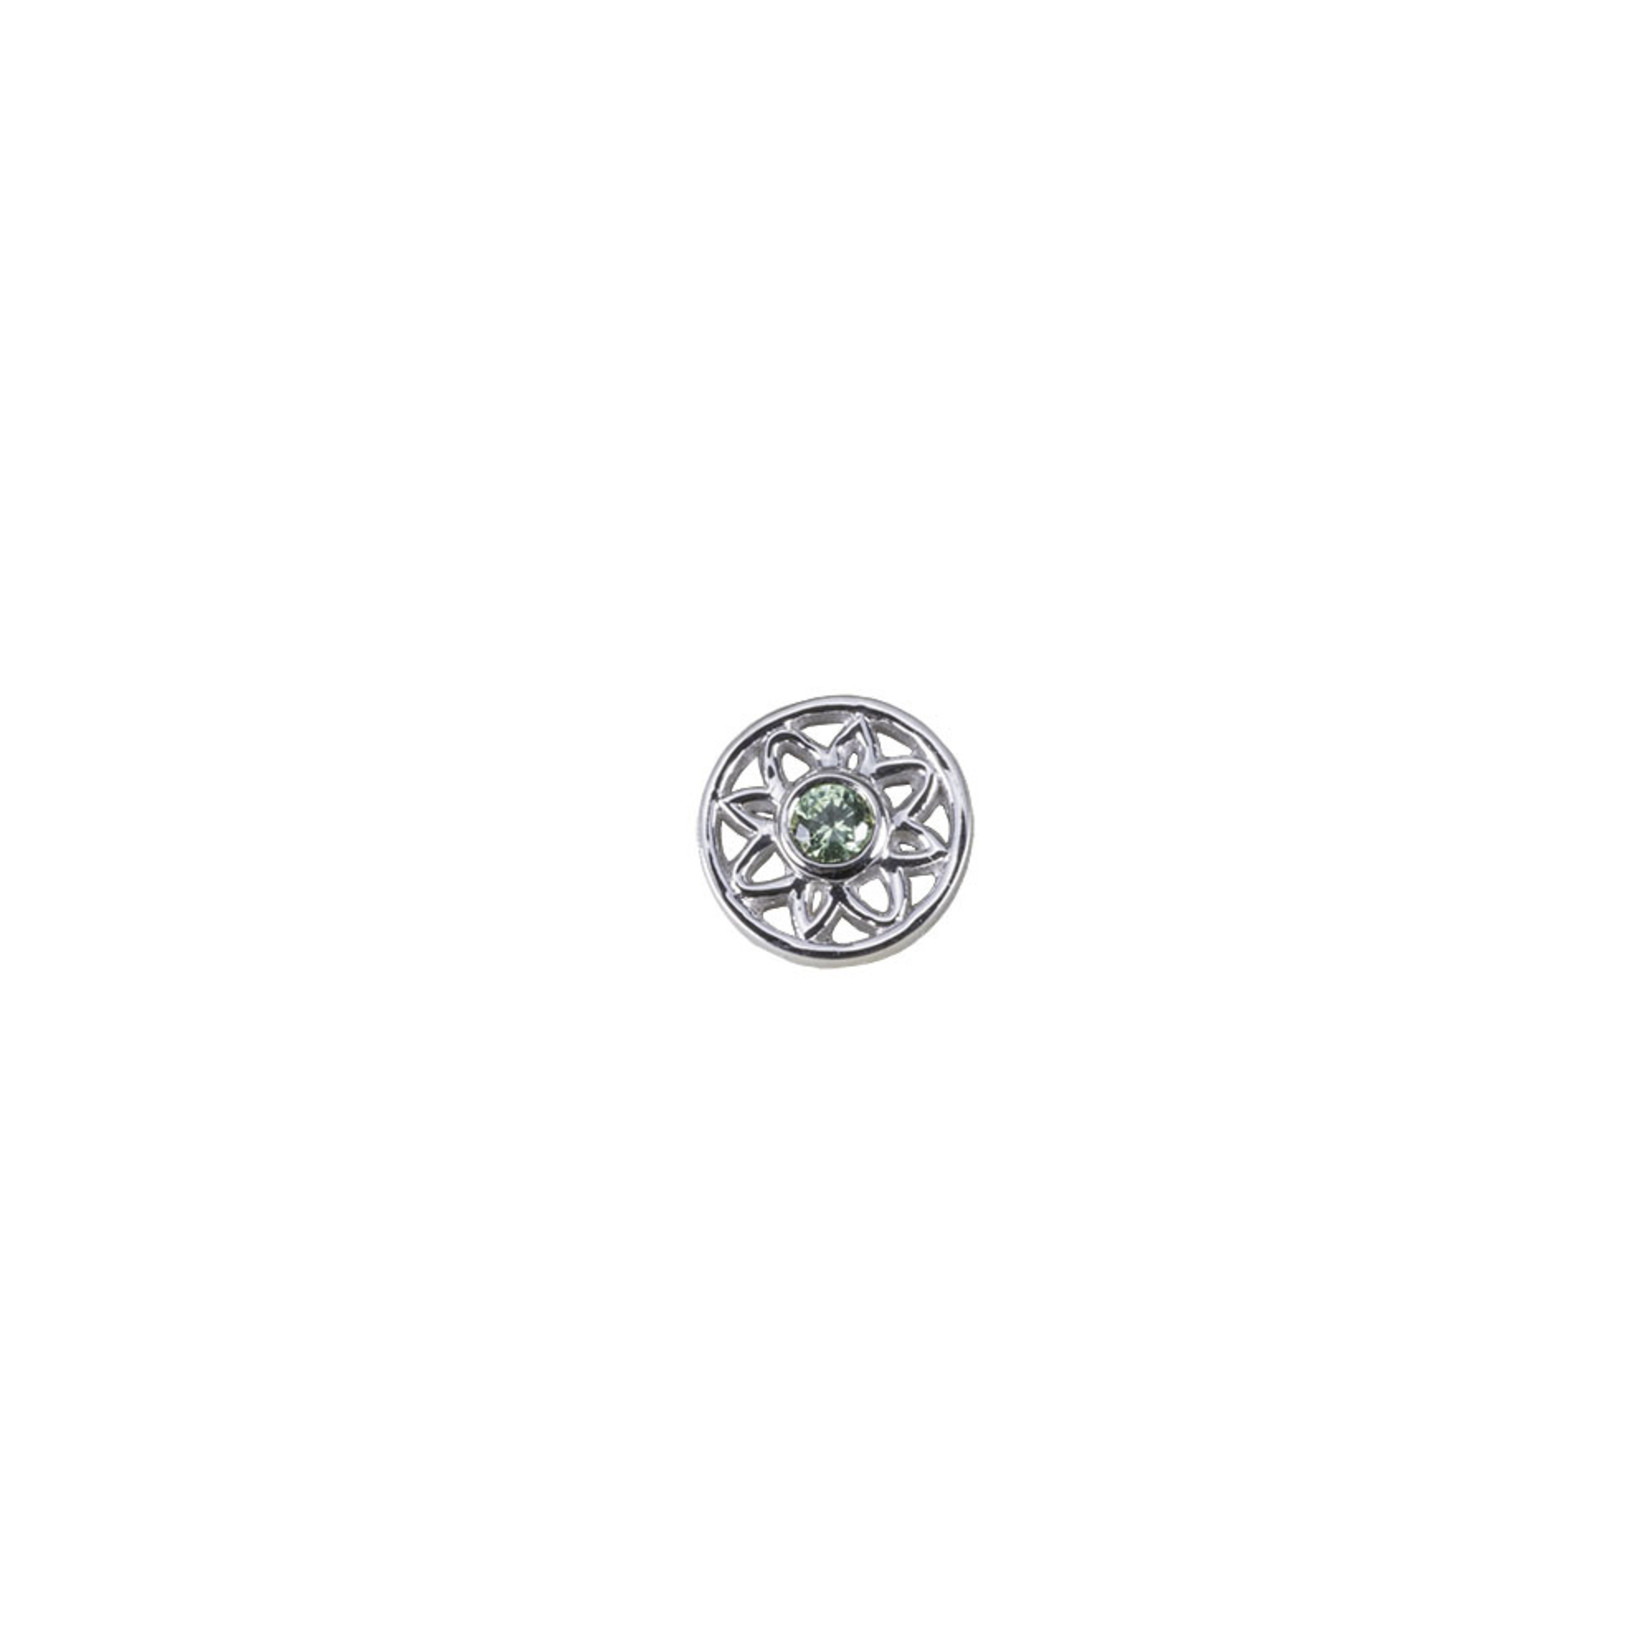 BVLA BVLA white gold 7.0 "Paloma Flower" threaded end with 2.0 AA tsavorite